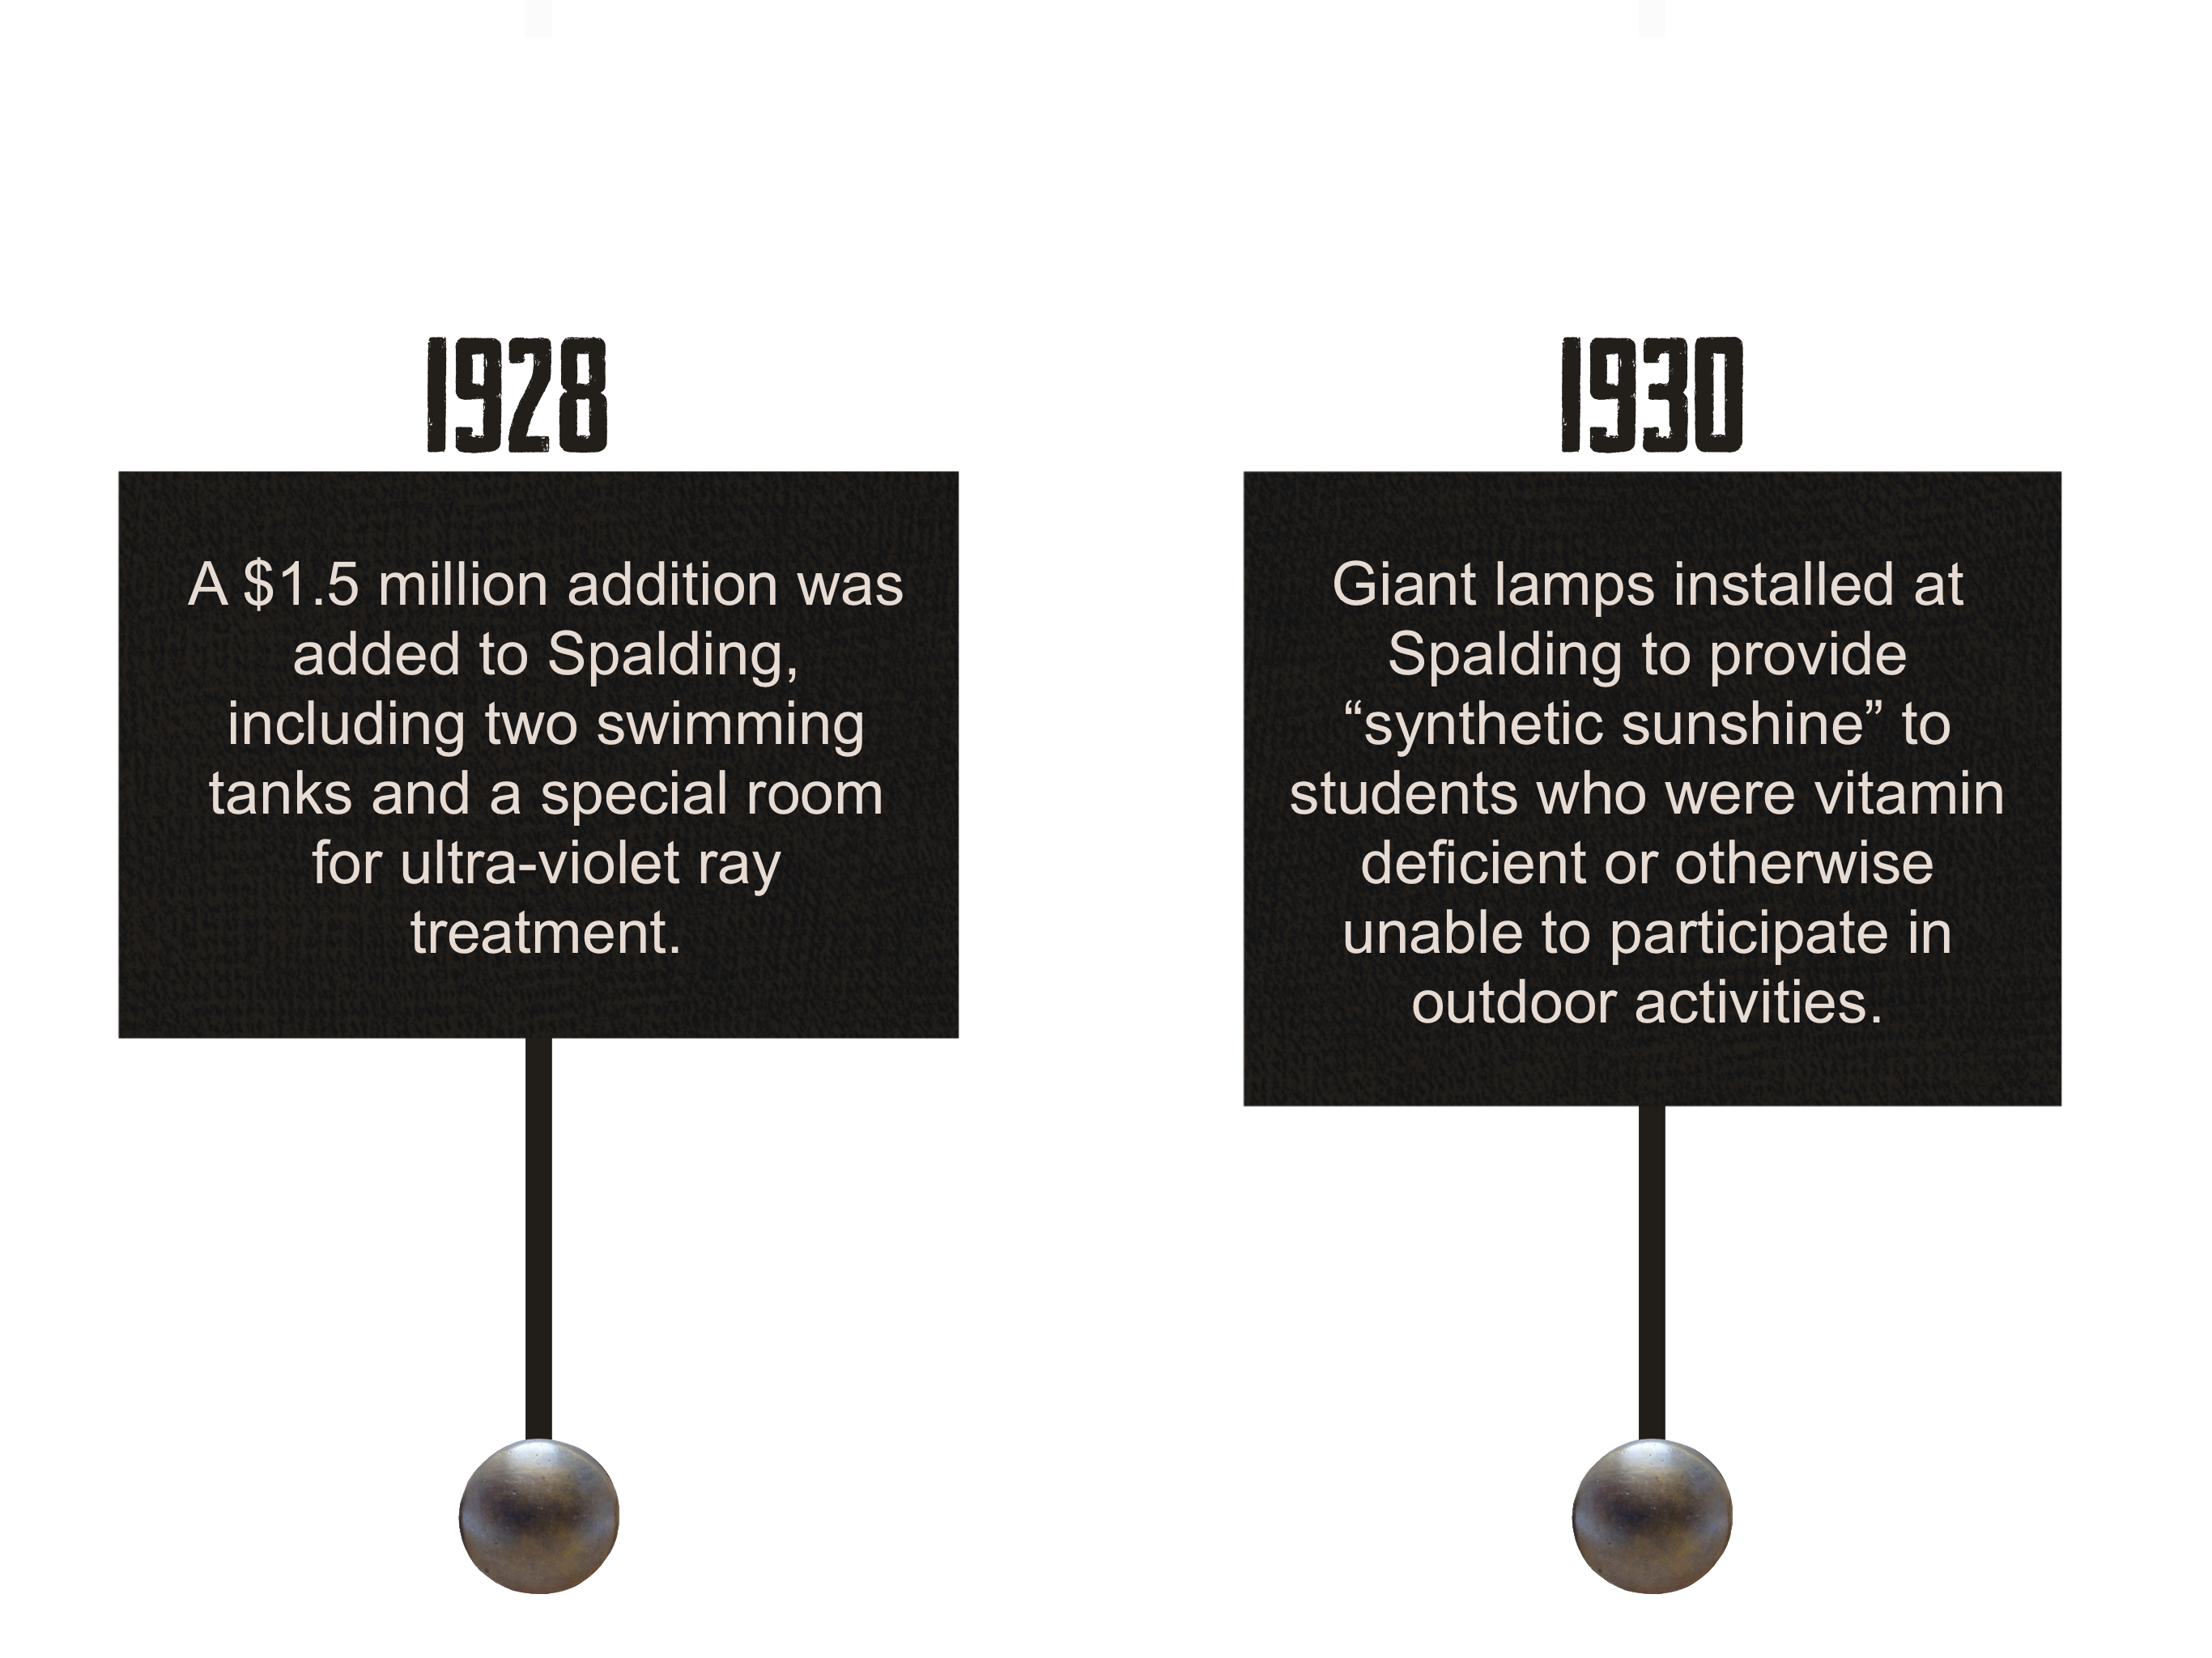 1928:
        A $1.5 million addition was added to Spalding, including two swimming tanks and a special room for ultra-violet ray treatment.
        1930:
        At Spalding, giant lamps were installed to provide “synthetic sunshine” to students who were vitamin deficient or otherwise could not participate in outdoor activities.
        